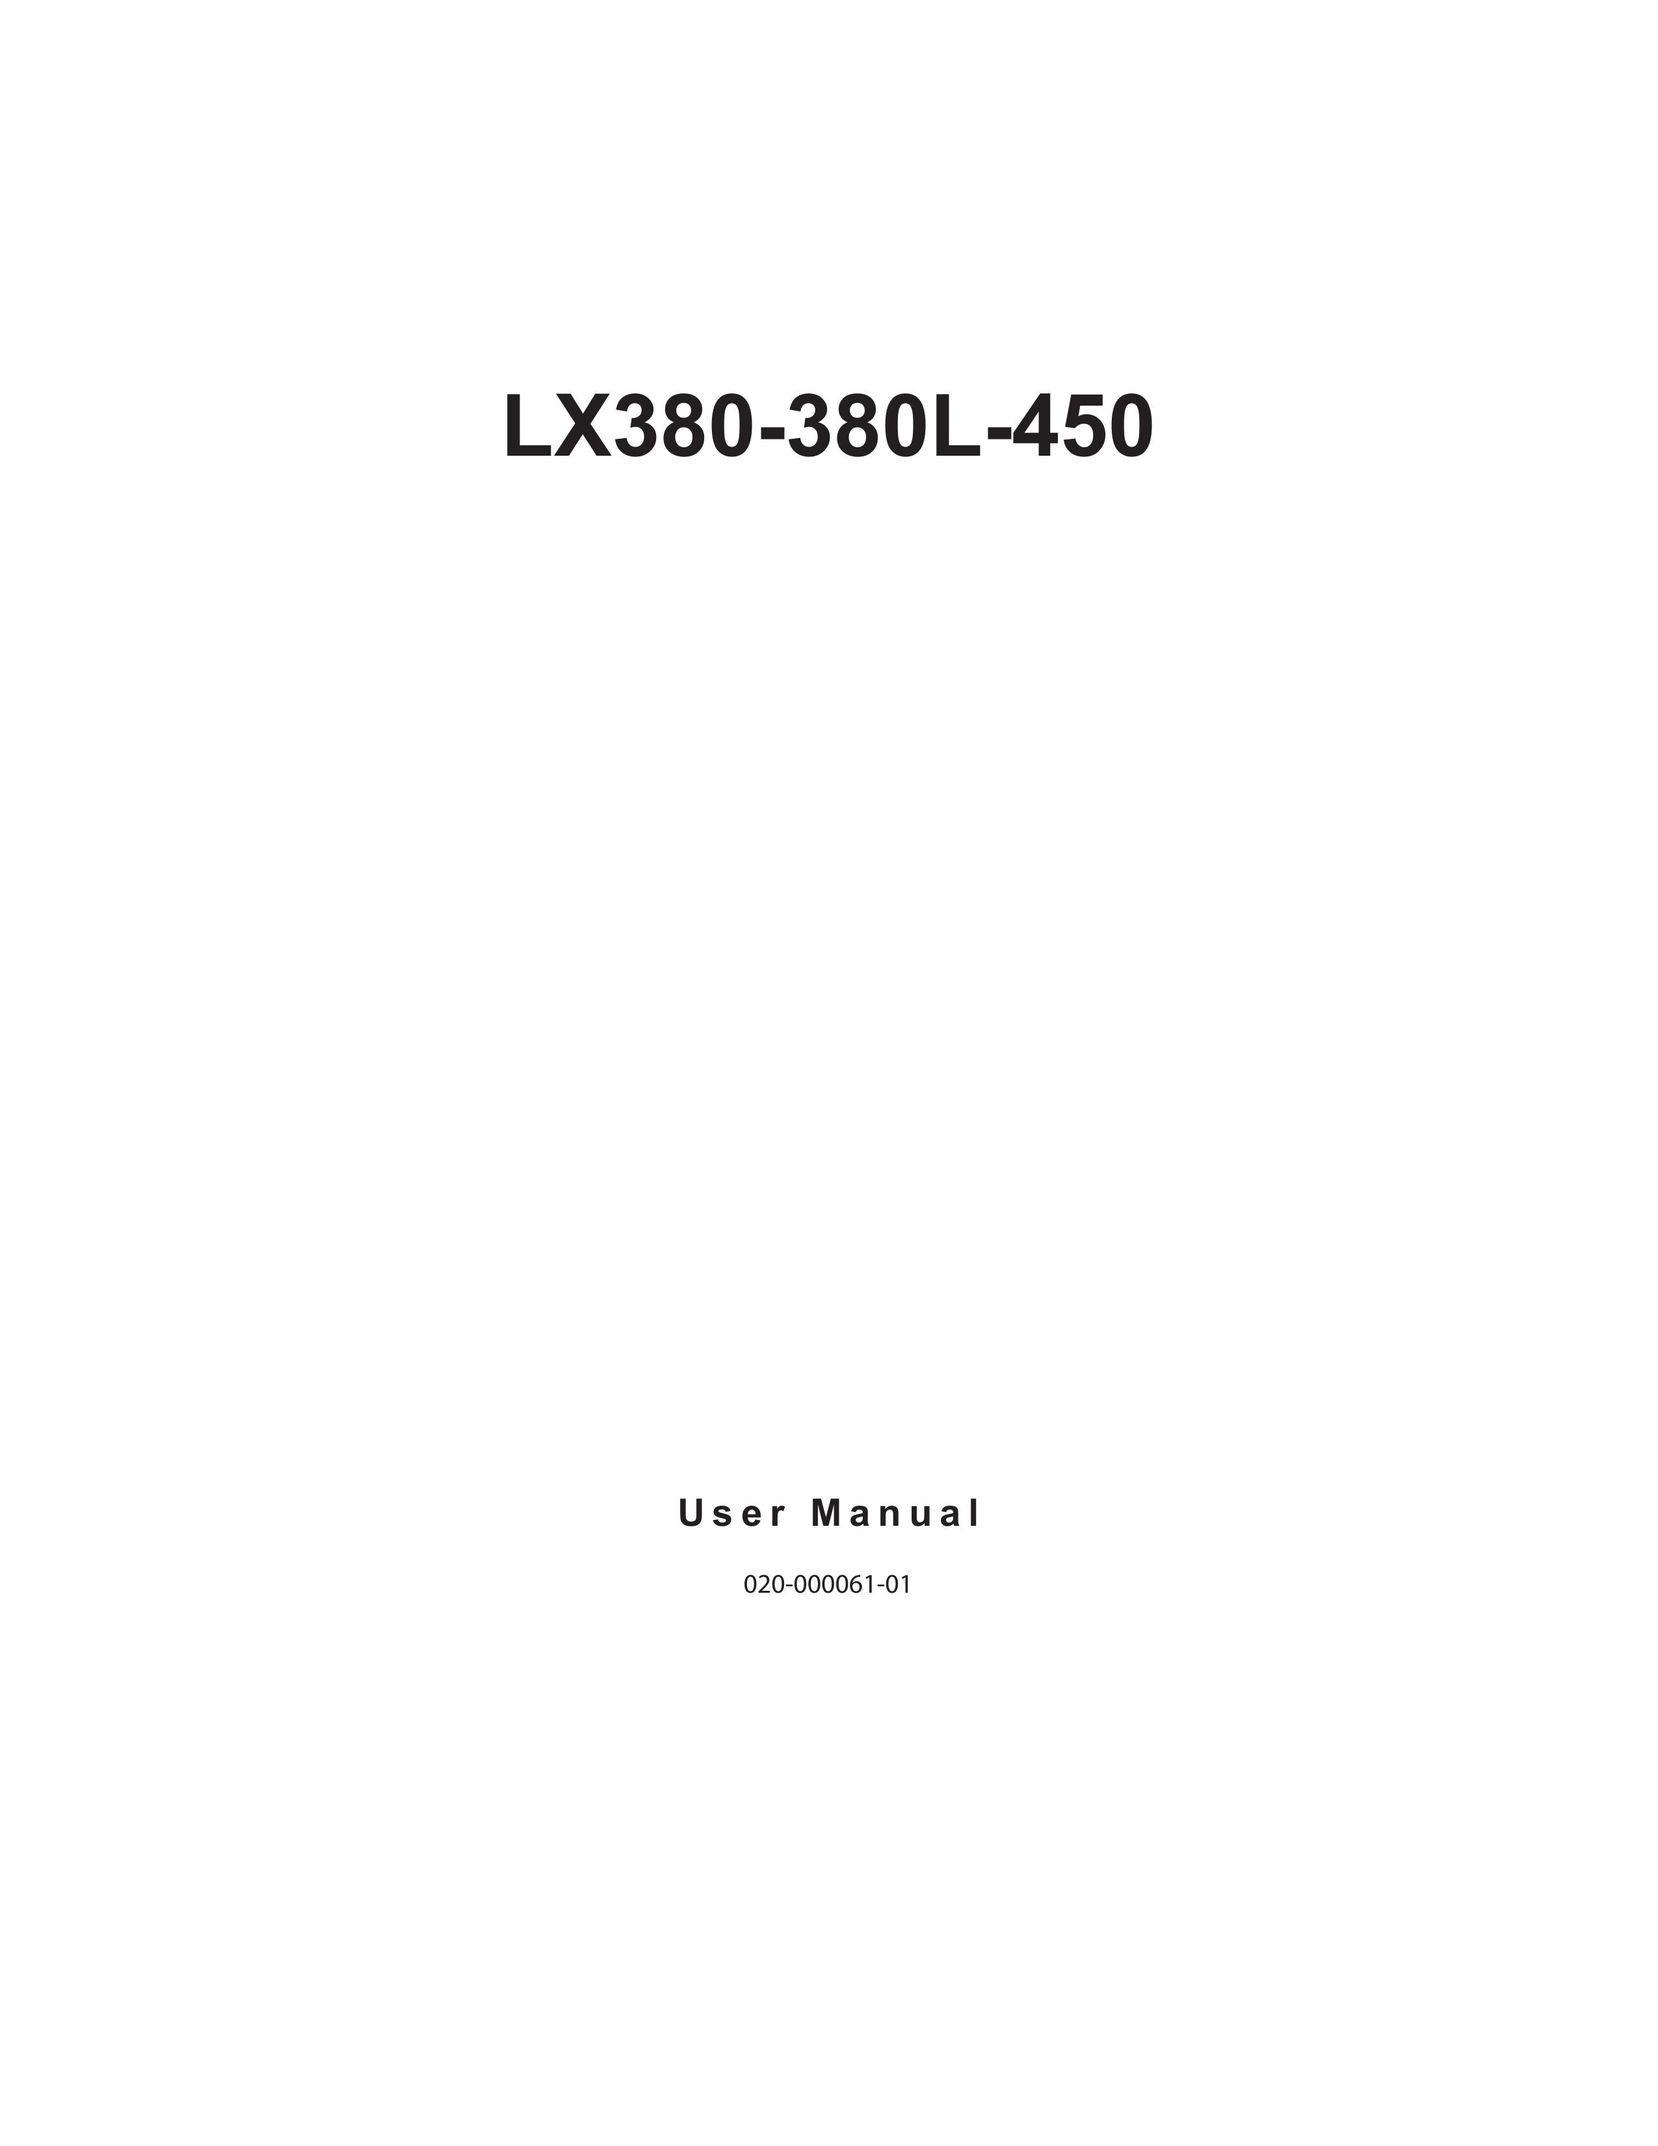 Christie Digital Systems 103-017101-01 Projector User Manual